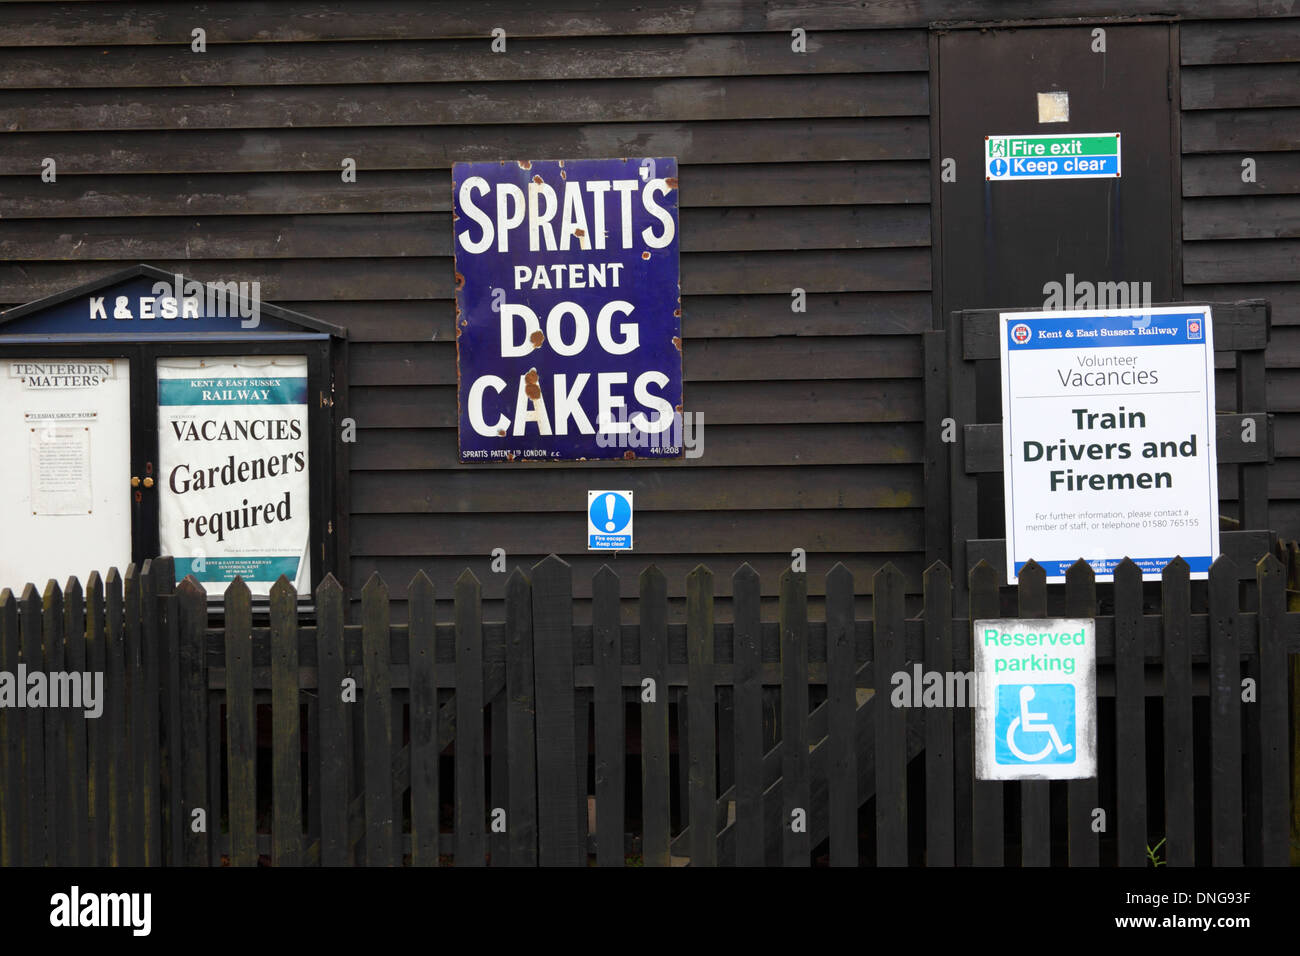 Old fashioned metal advert for Spratts Dog Cakes and job vacancies, Tenterden station, Kent & East Sussex Railway, England Stock Photo